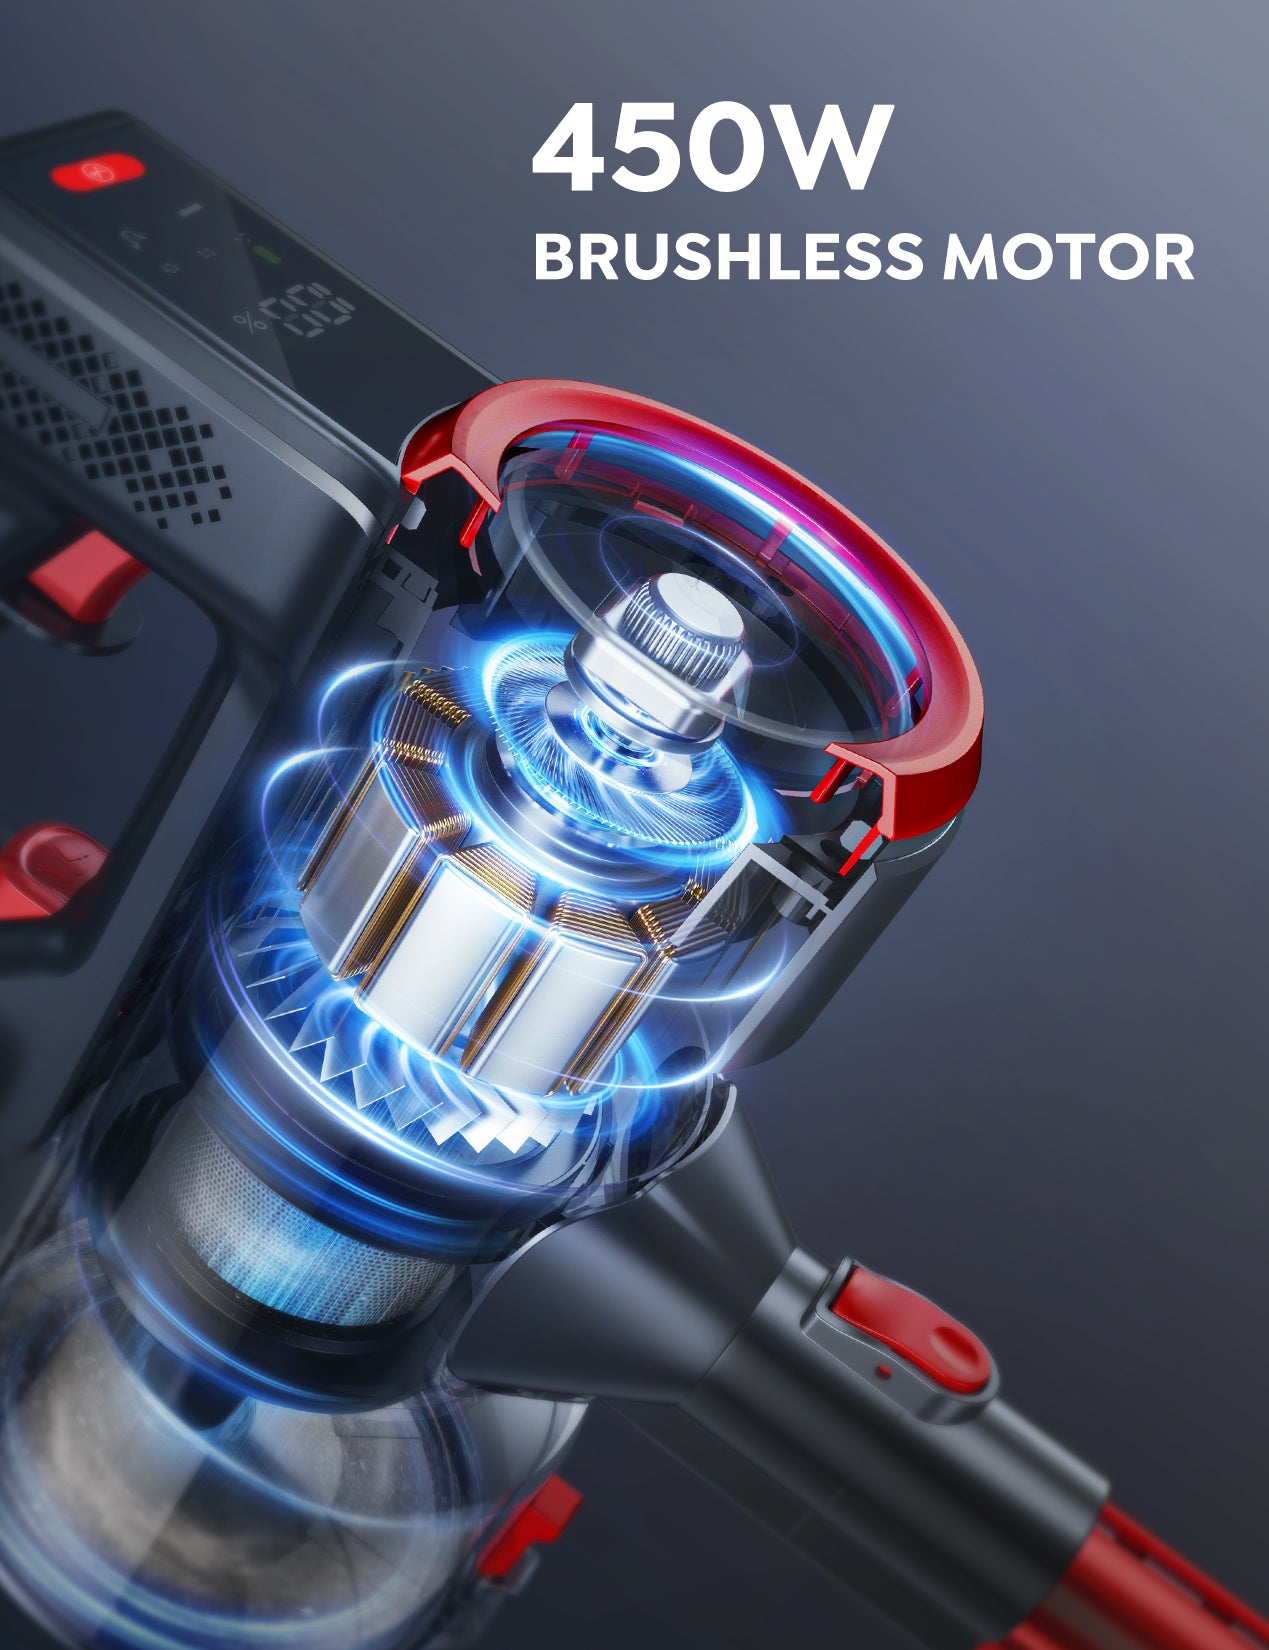 450W Powerful Suction of BuTure JR700 Vacuum Cleaner